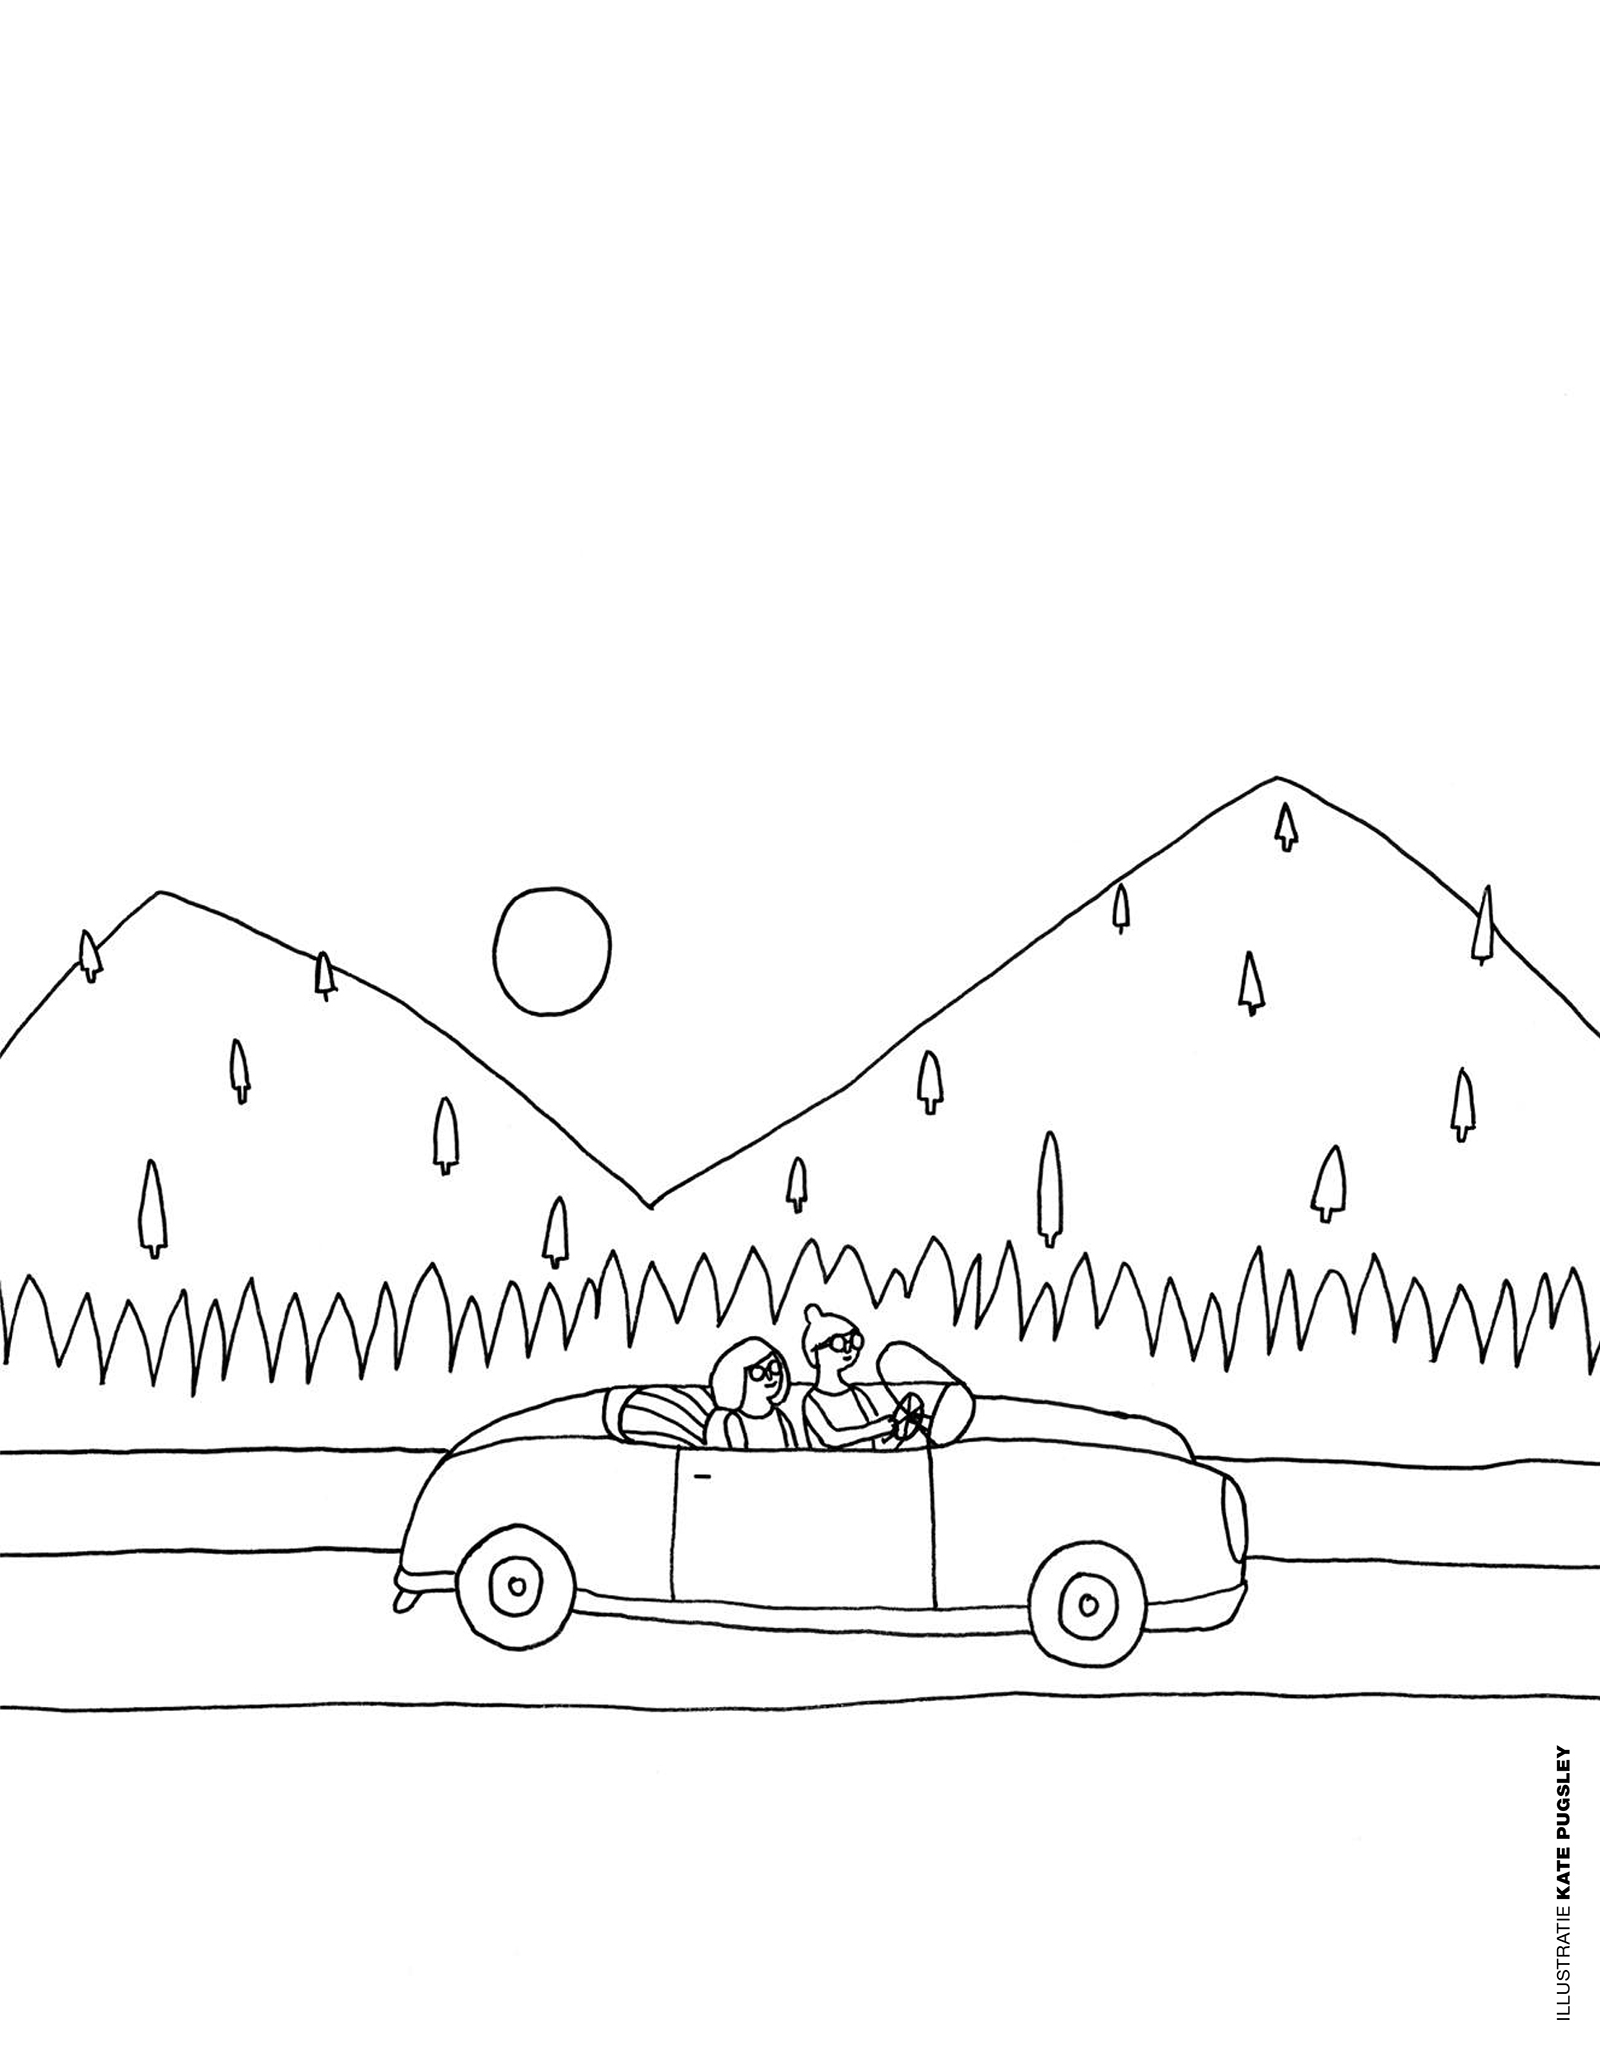 Coloring page - Kate Pugsley: car